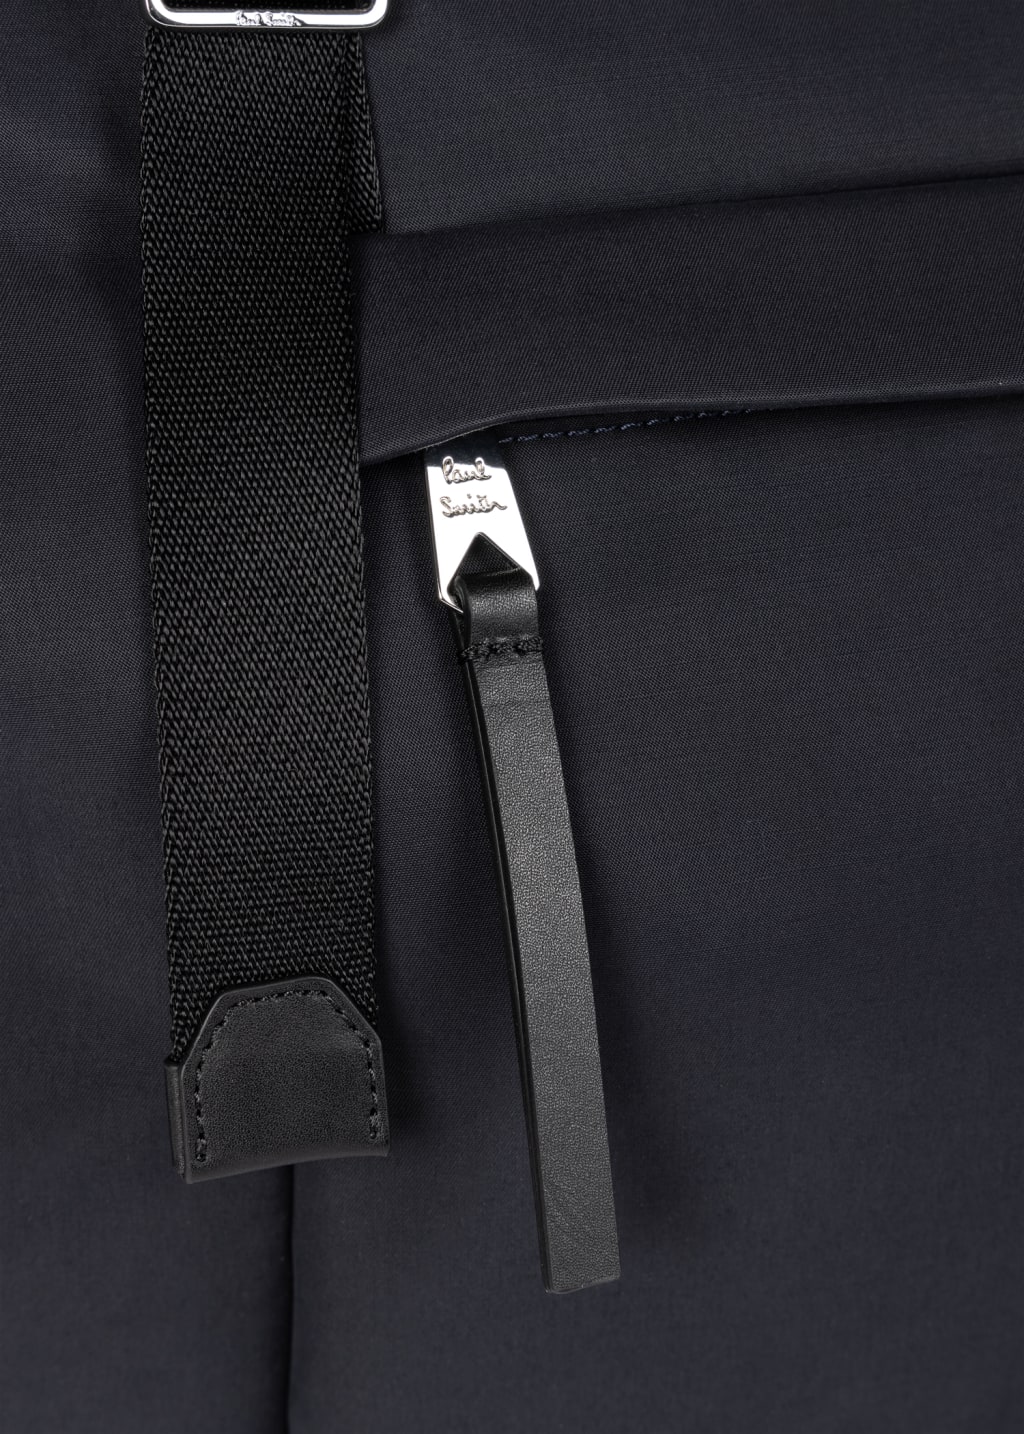 Detail View - Navy Cotton-Blend Canvas Holdall Paul Smith